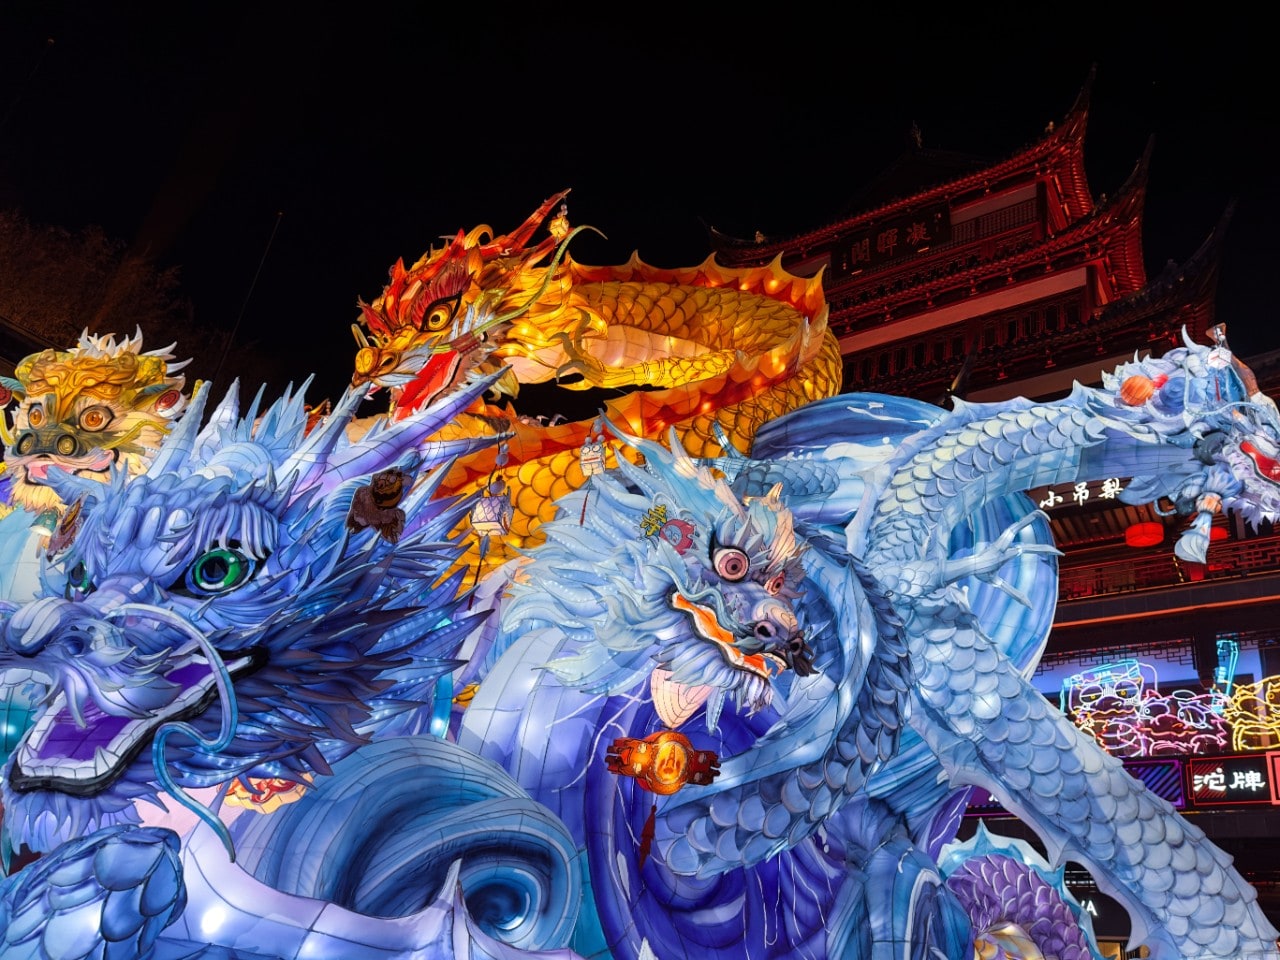 Bright blue lanterns in the shape of dragons in the street at night time